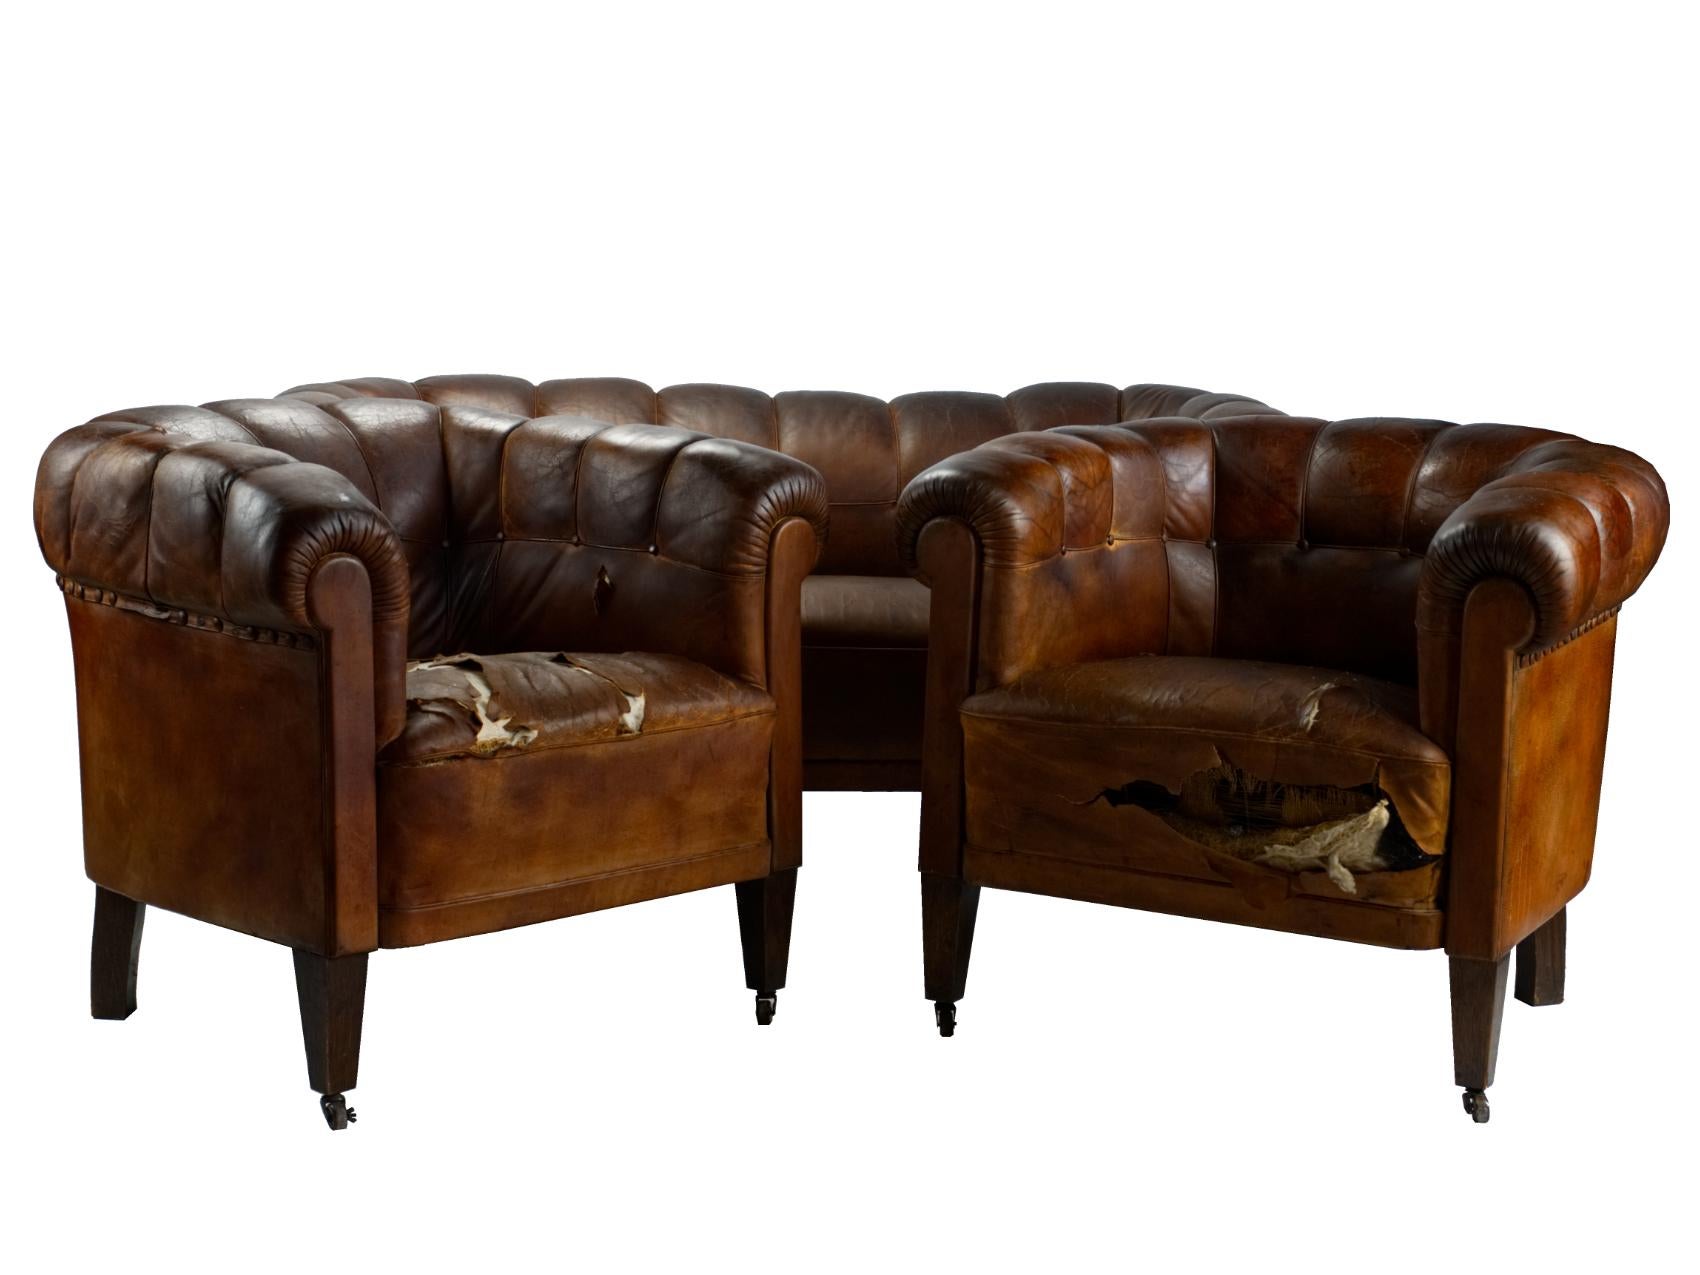 Austrian Art Deco Leather Club Chairs or Armchairs and Sofa, Seating Set, circa 1920